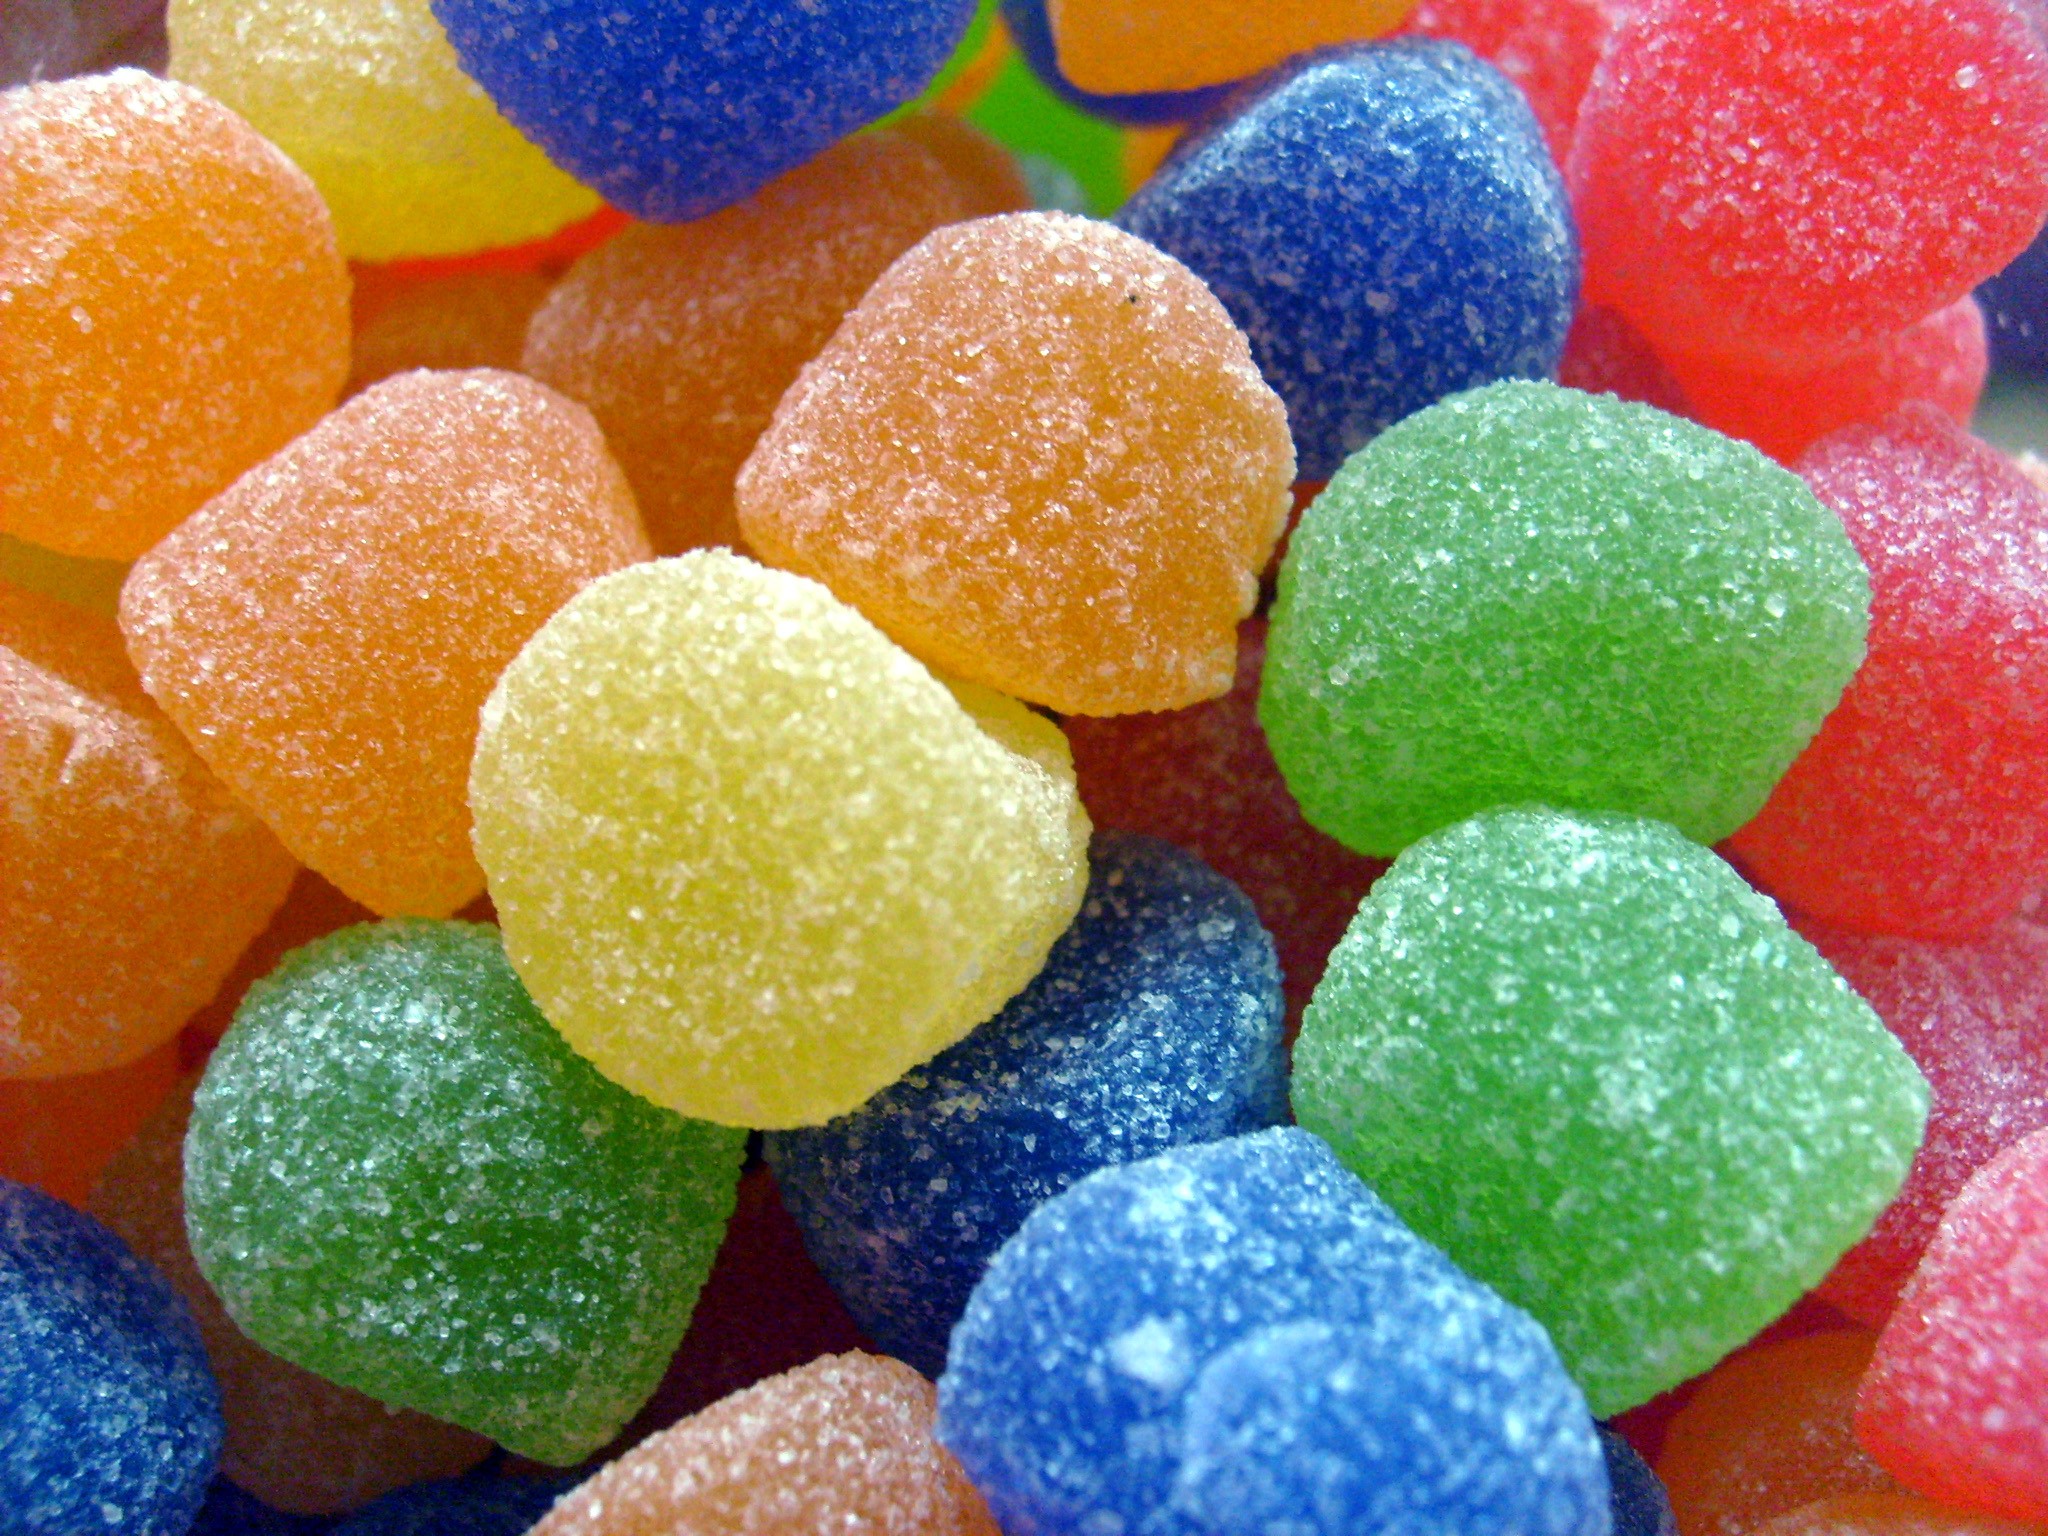 Sugar Wallpapers Hd Desktop And Mobile Backgrounds